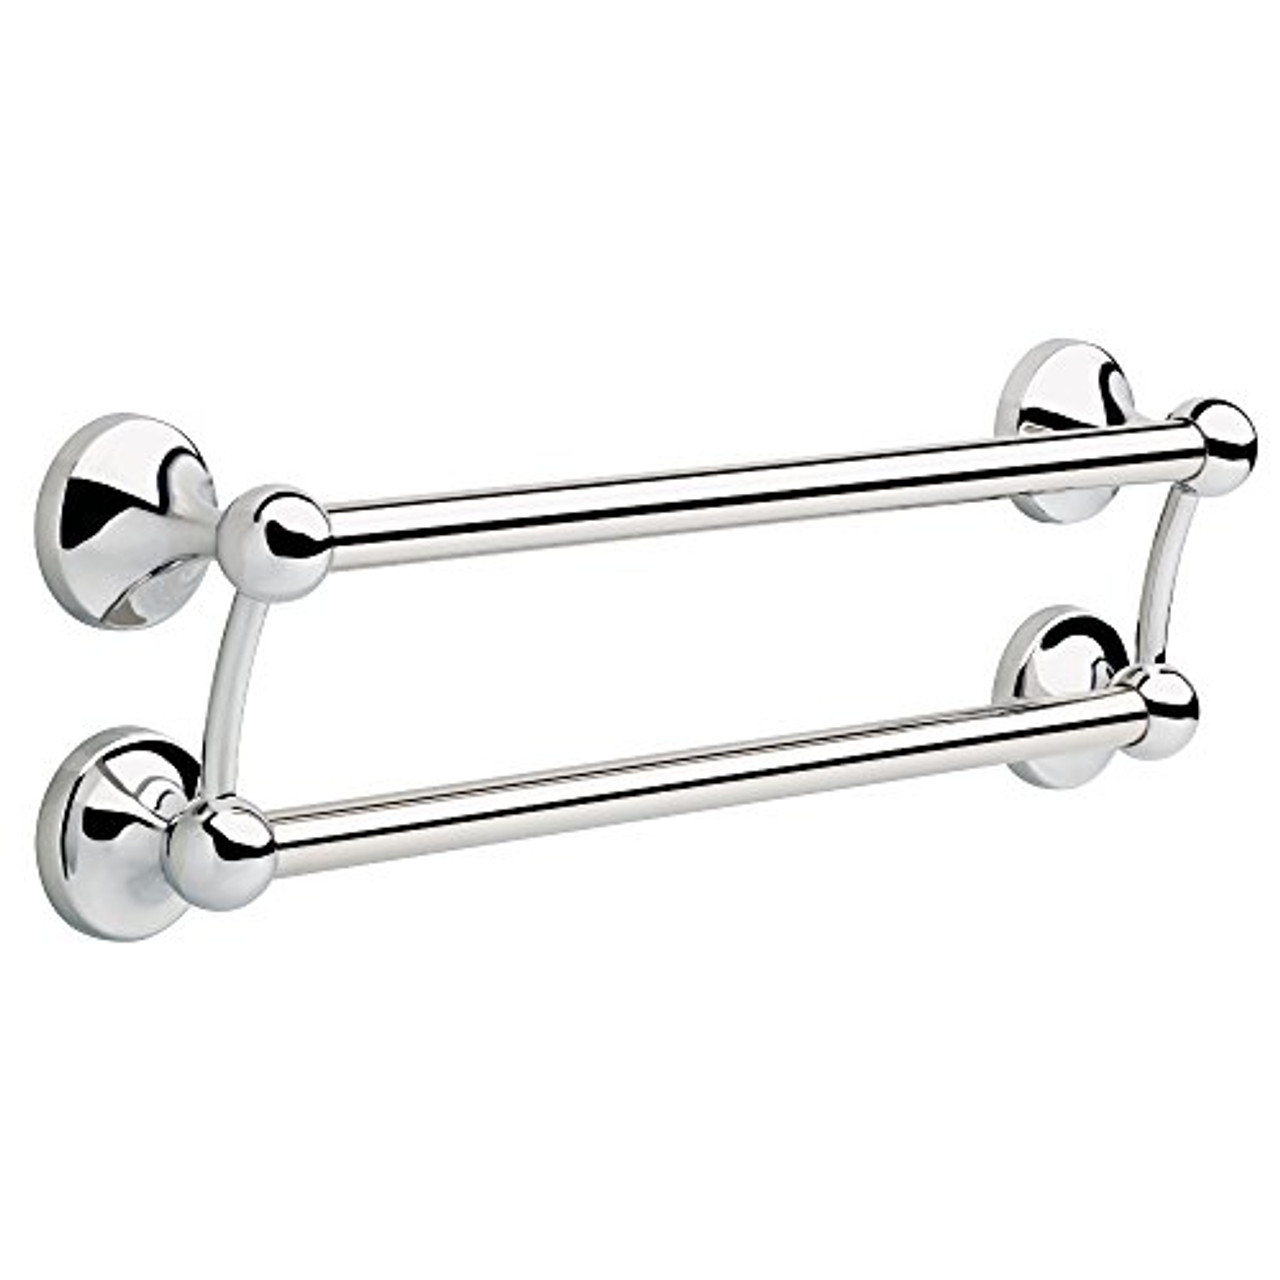 DF703PC Traditional 18" Double Towel Assist Bar Chrome Finish